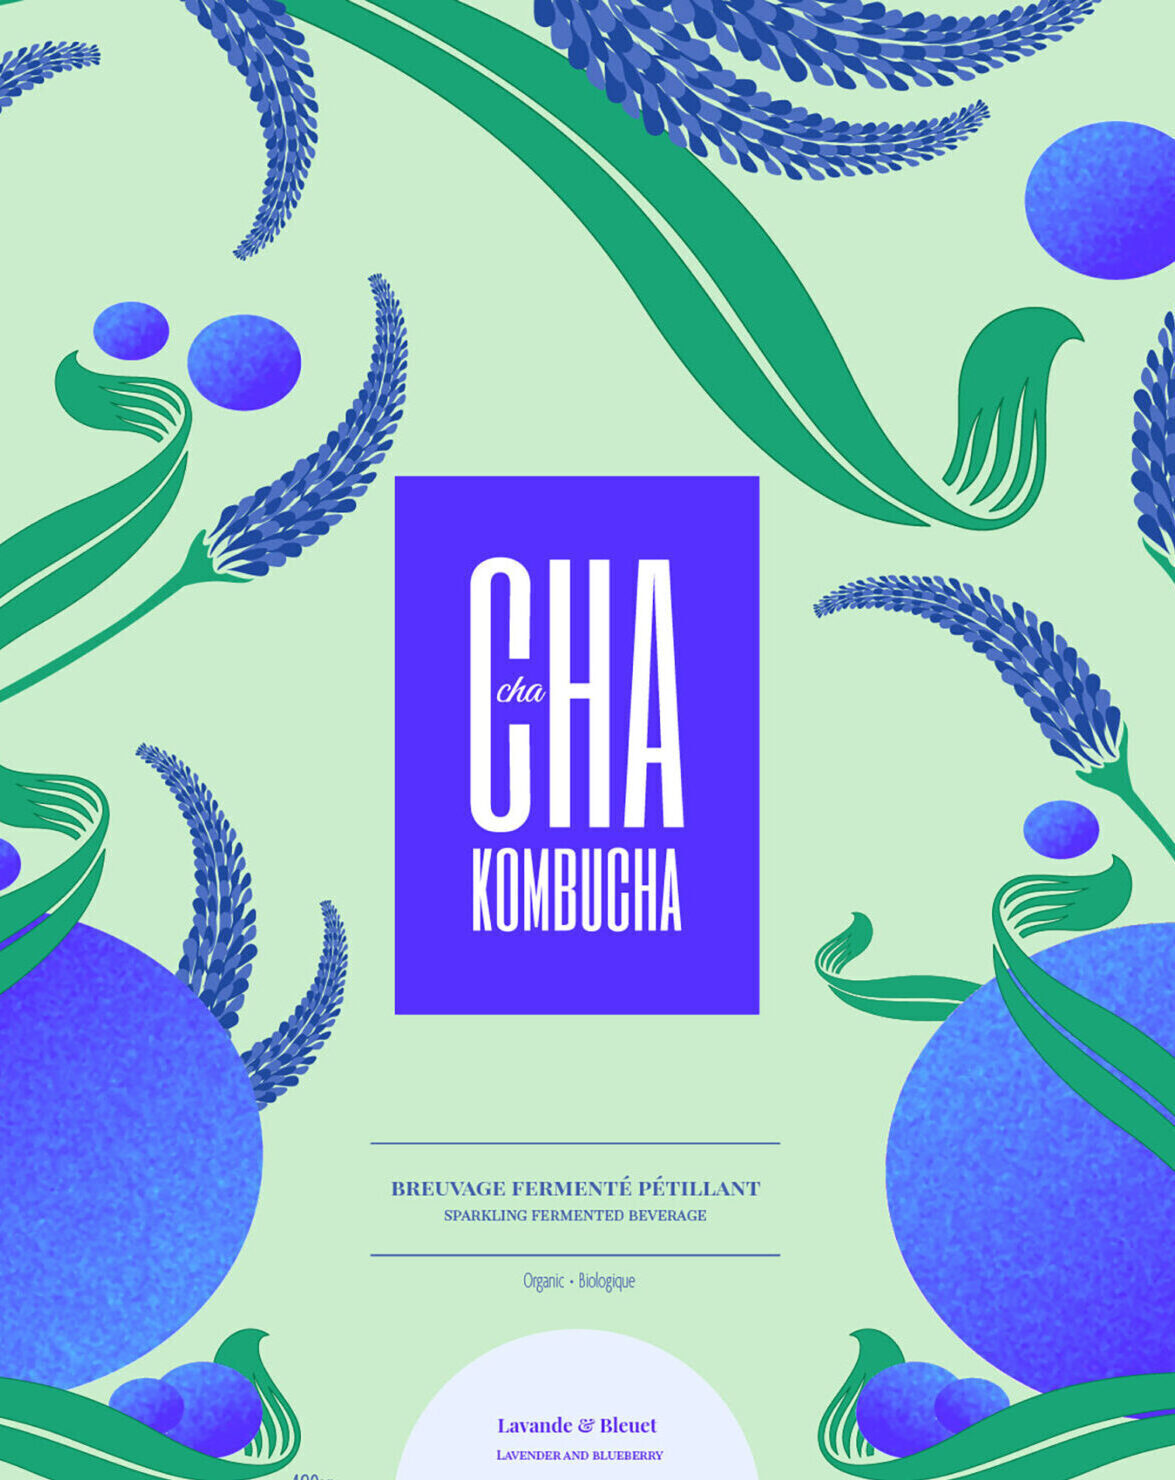 This acts as a thumbnail for the drink packaging project. It features a blue and green background with illustrated leaves and violet details. The front label say Cha cha Kombucha.